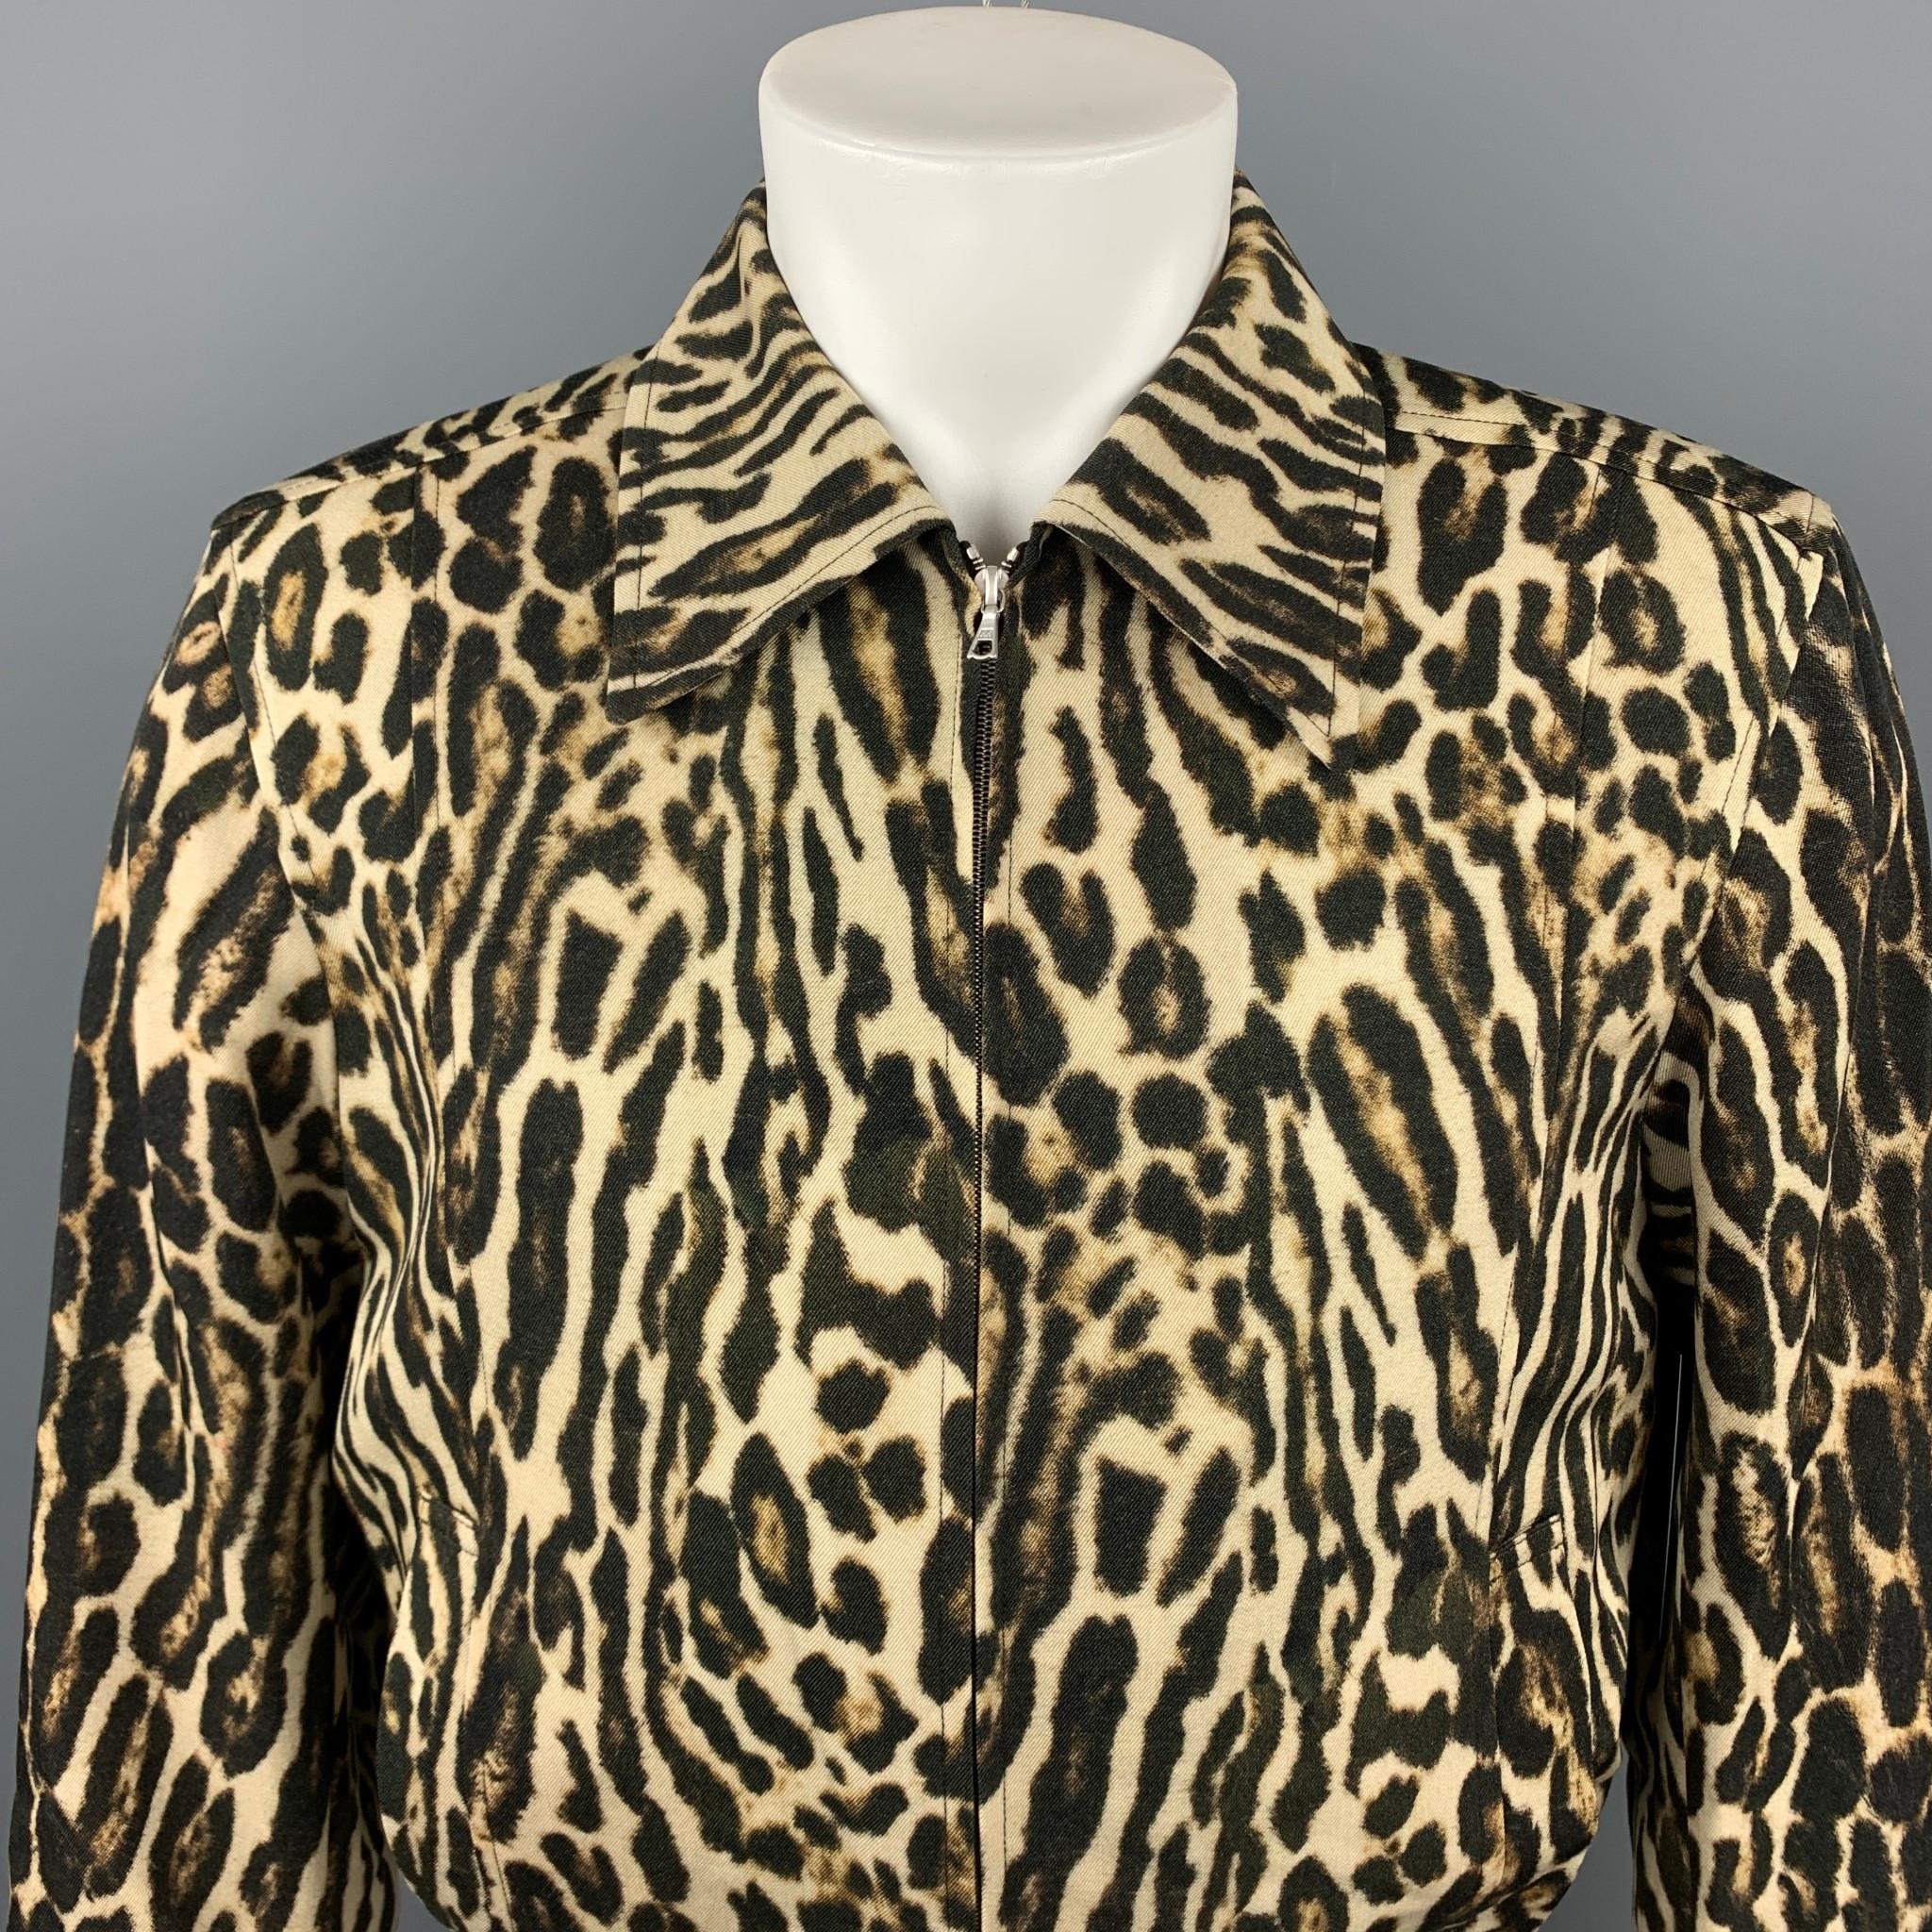 DRIES VAN NOTEN S/S 2020 jacket comes in a black & tan leopard print wool with a full liner featuring a elastic waistband, slit pockets, pointed collar, and a zip up closure. Made in Poland.

New With Tags.
Marked: 44

Measurements:

Shoulder: 18.5